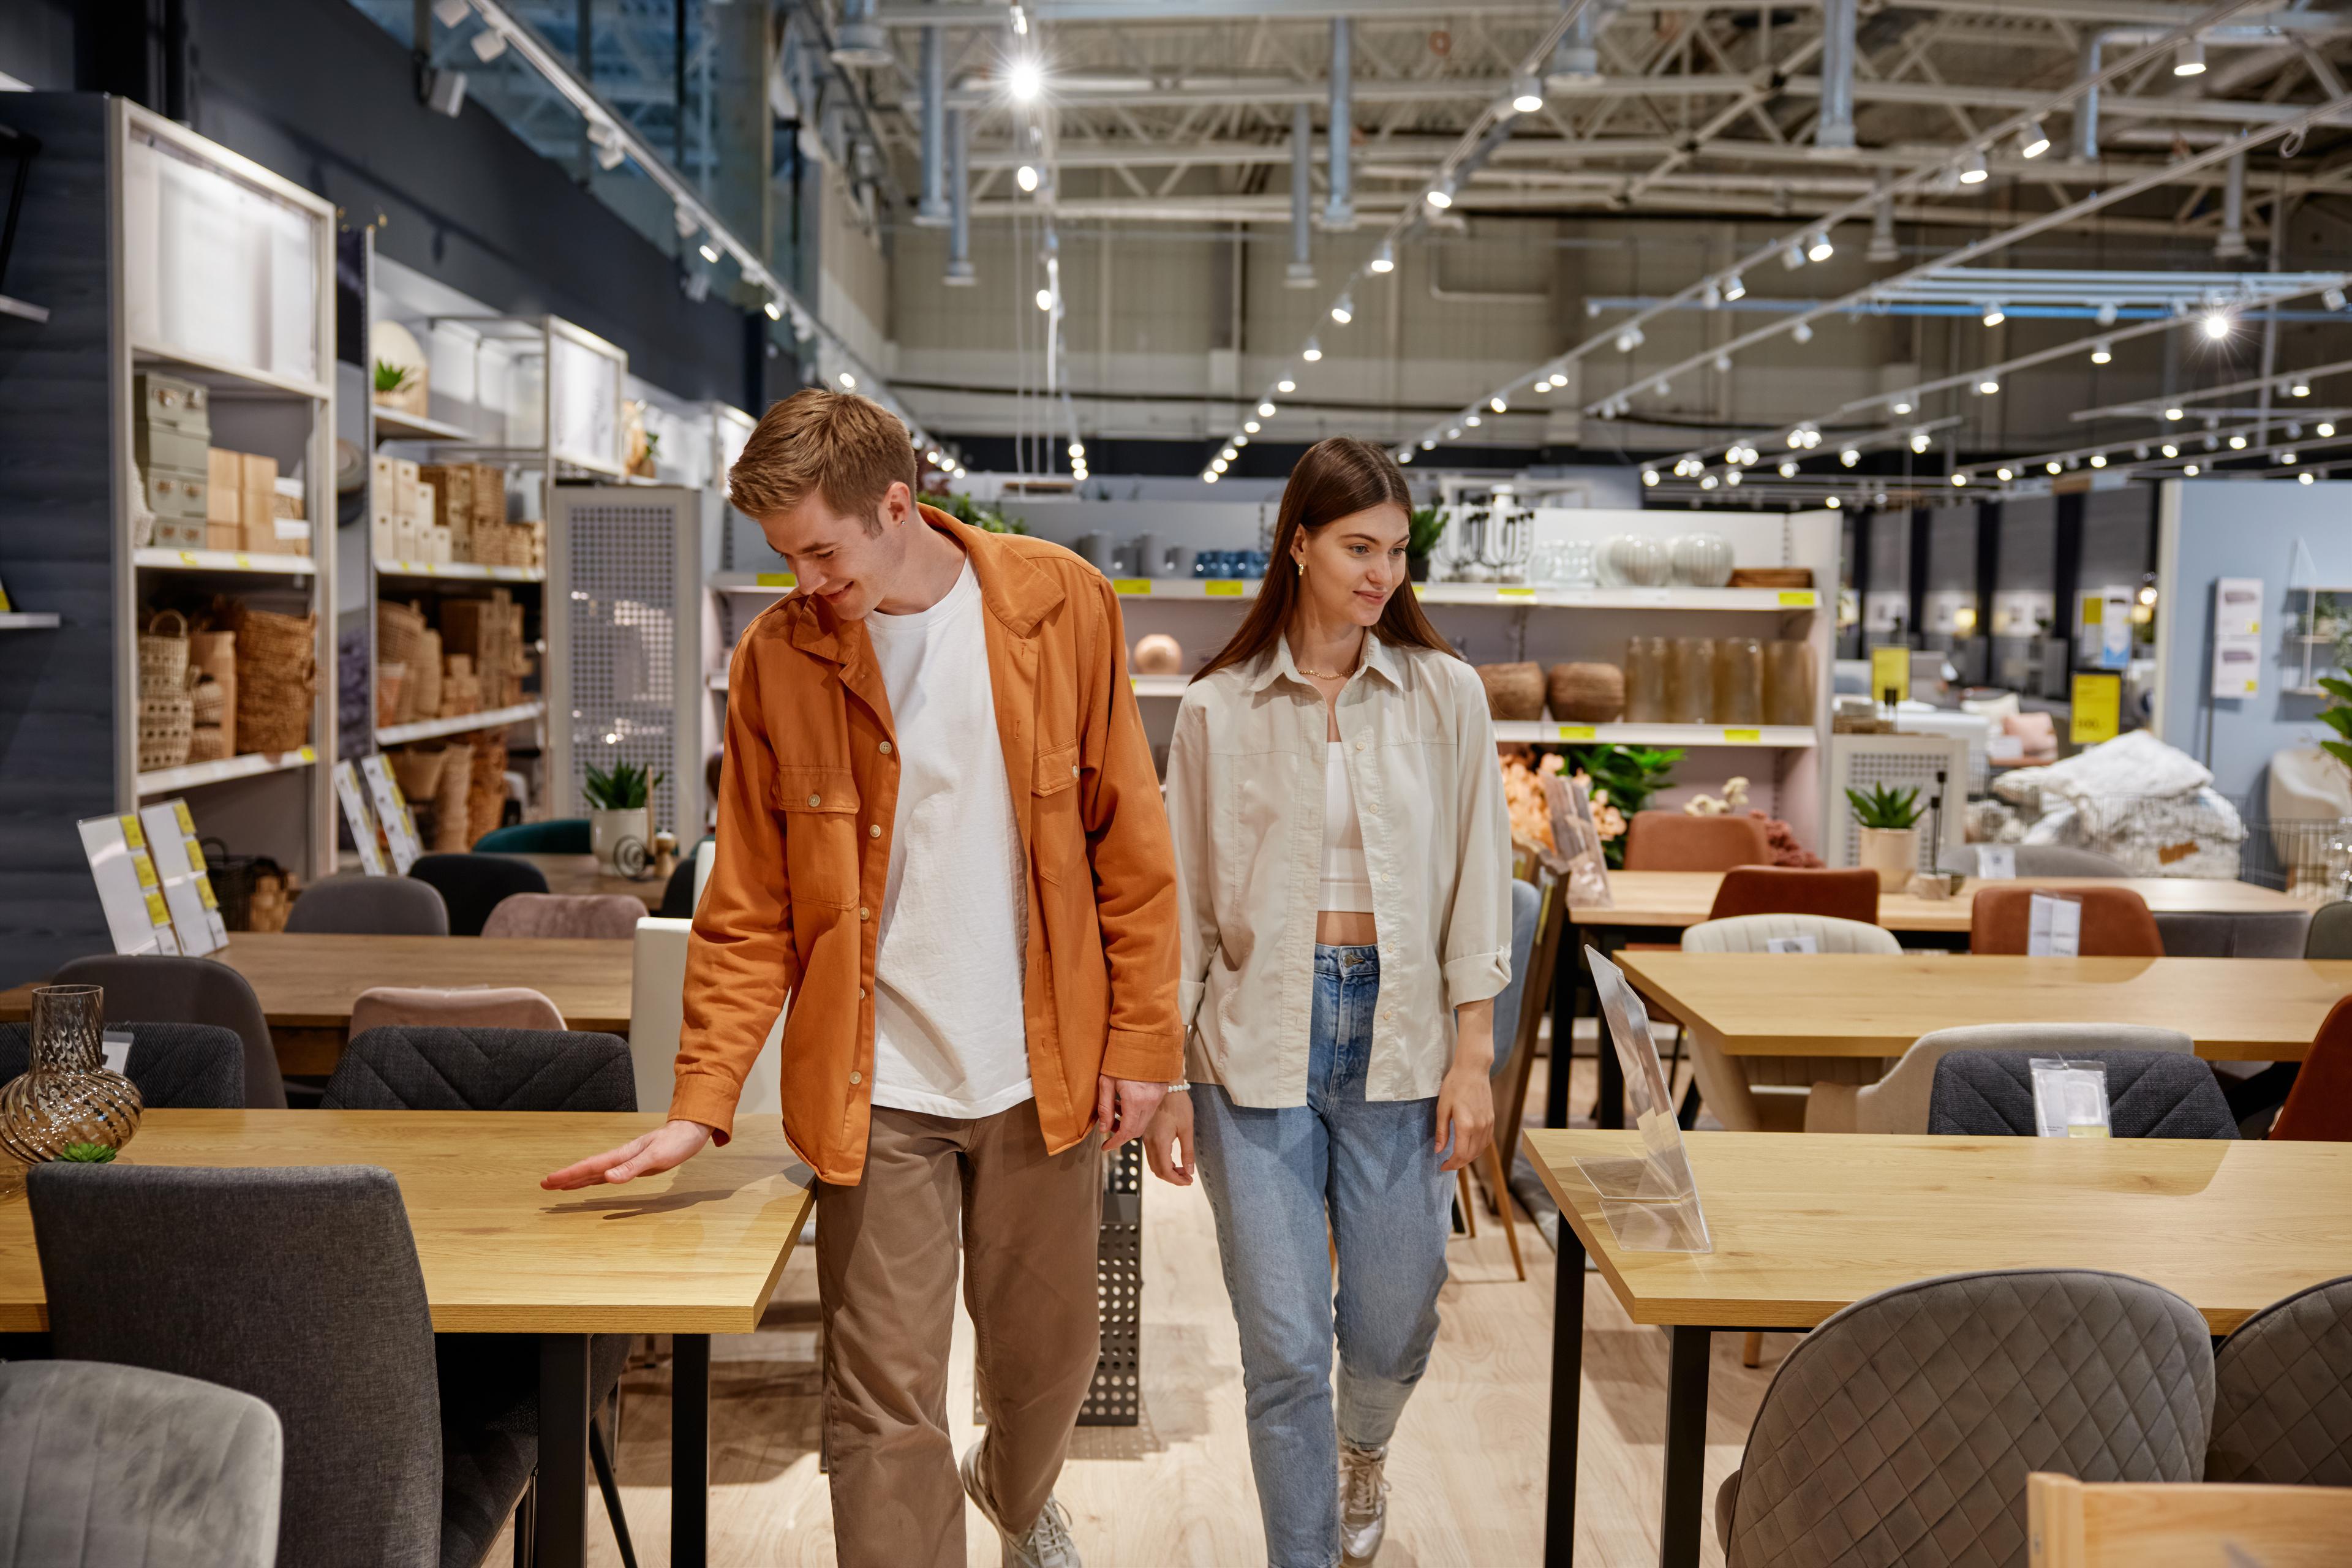 A man and woman shopping in a retail store for furniture shows the ease of using Acima Leasing for home product needs.